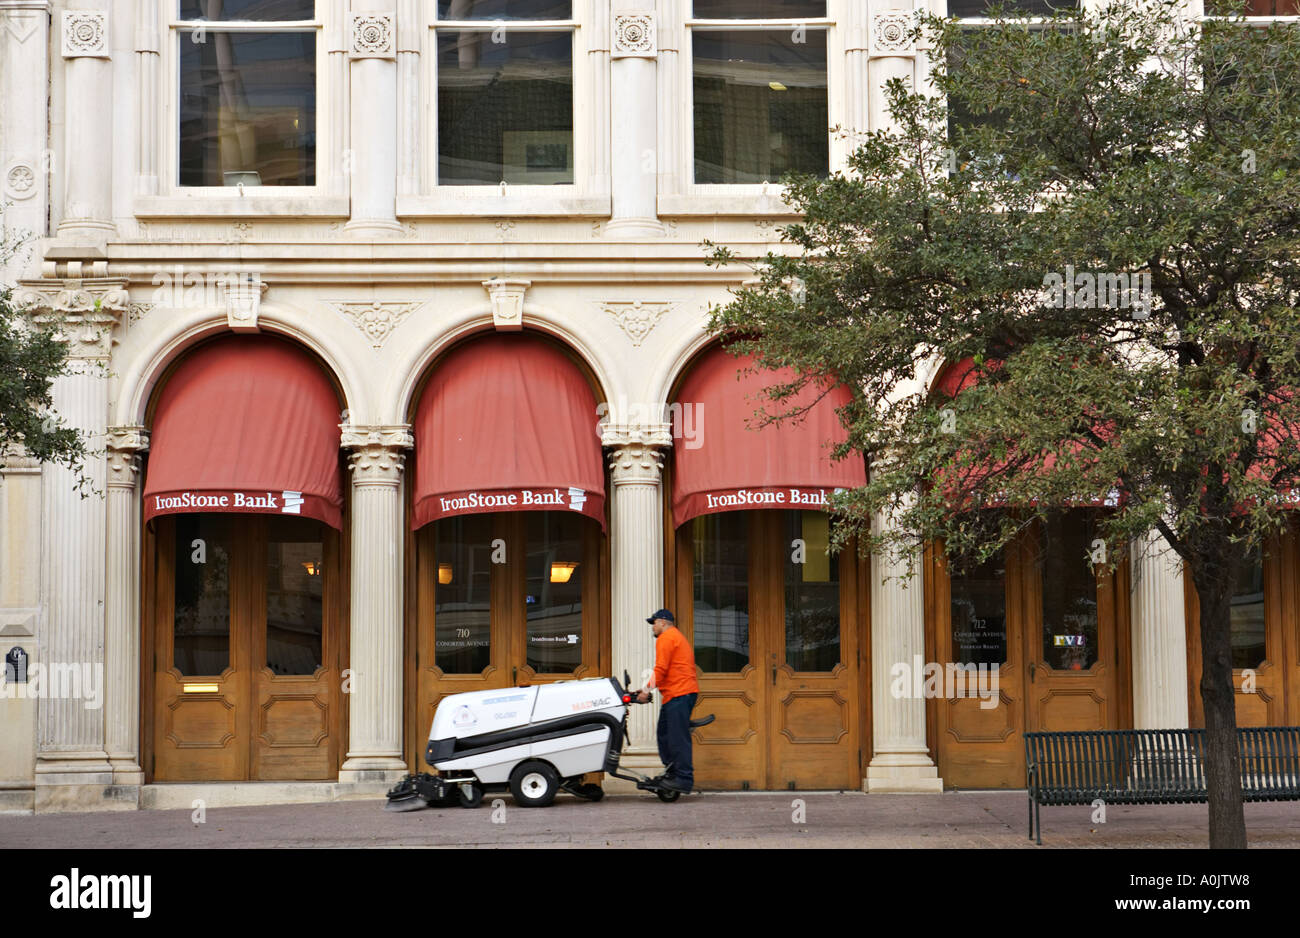 TEXAS Austin Man stand on back of motorized sidewalk cleaner brushes clean outside IronStone Bank building Congress Street Stock Photo